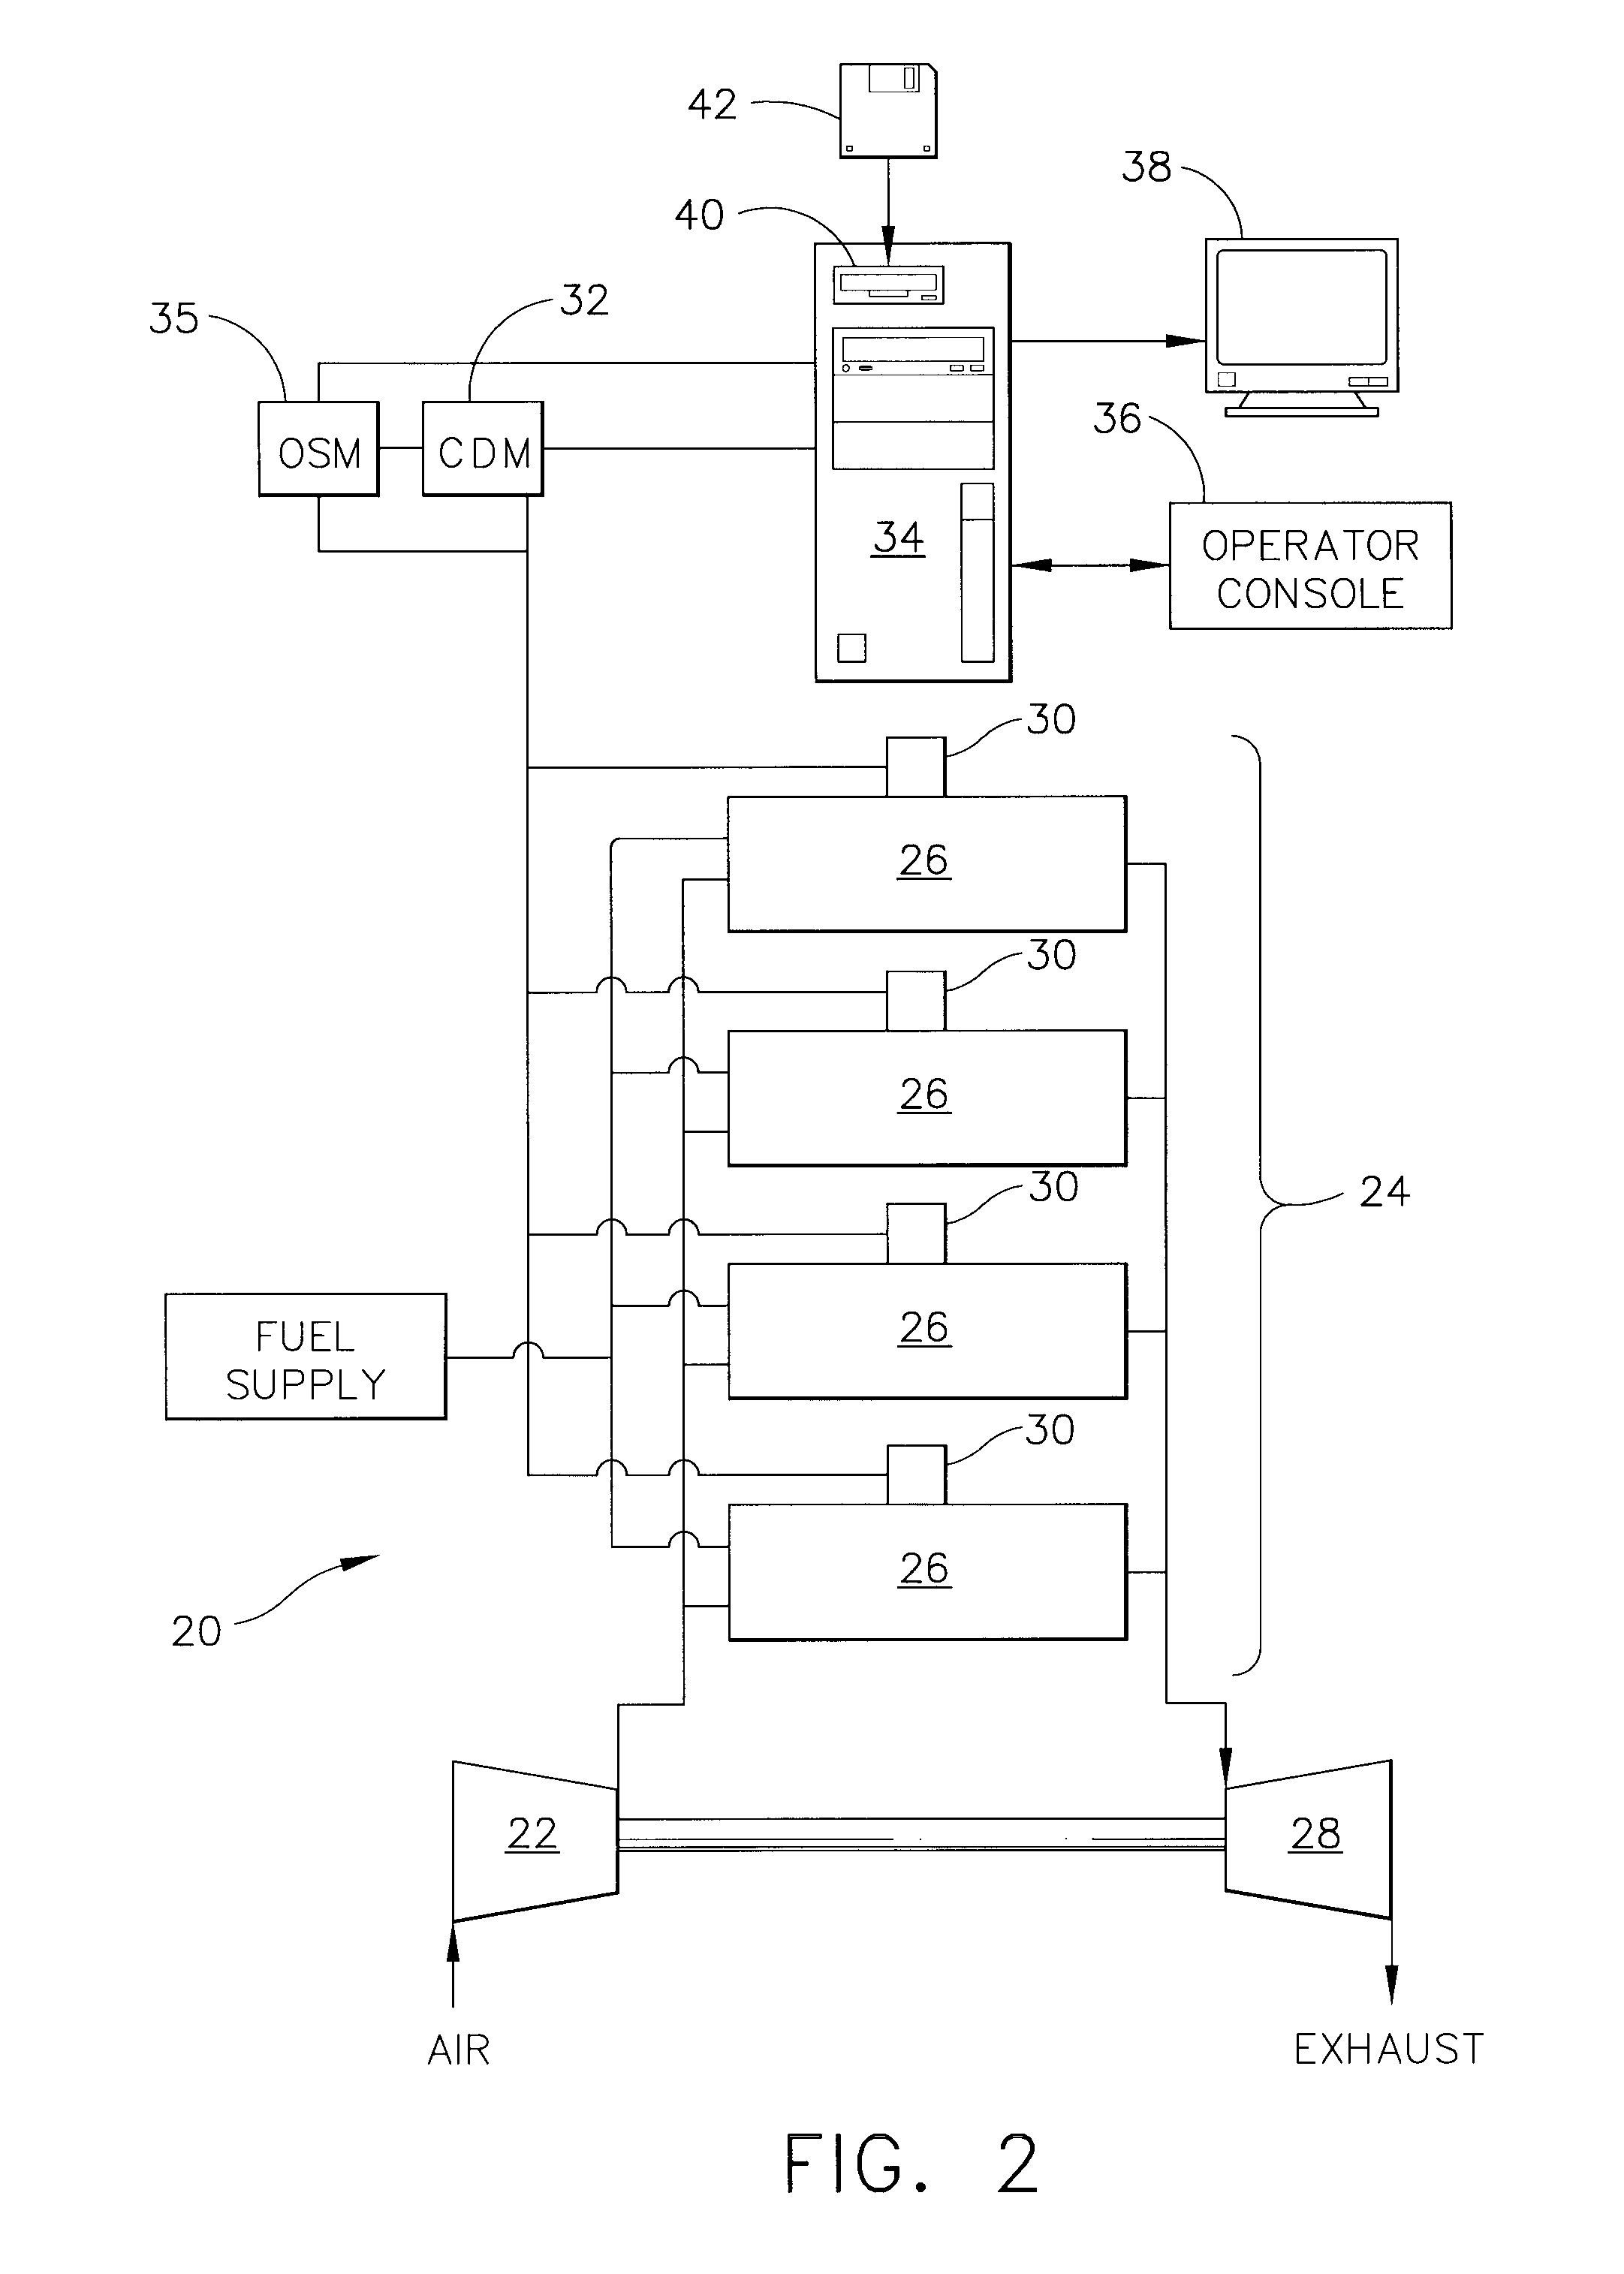 Method and apparatus for remotely monitoring gas turbine combustion dynamics